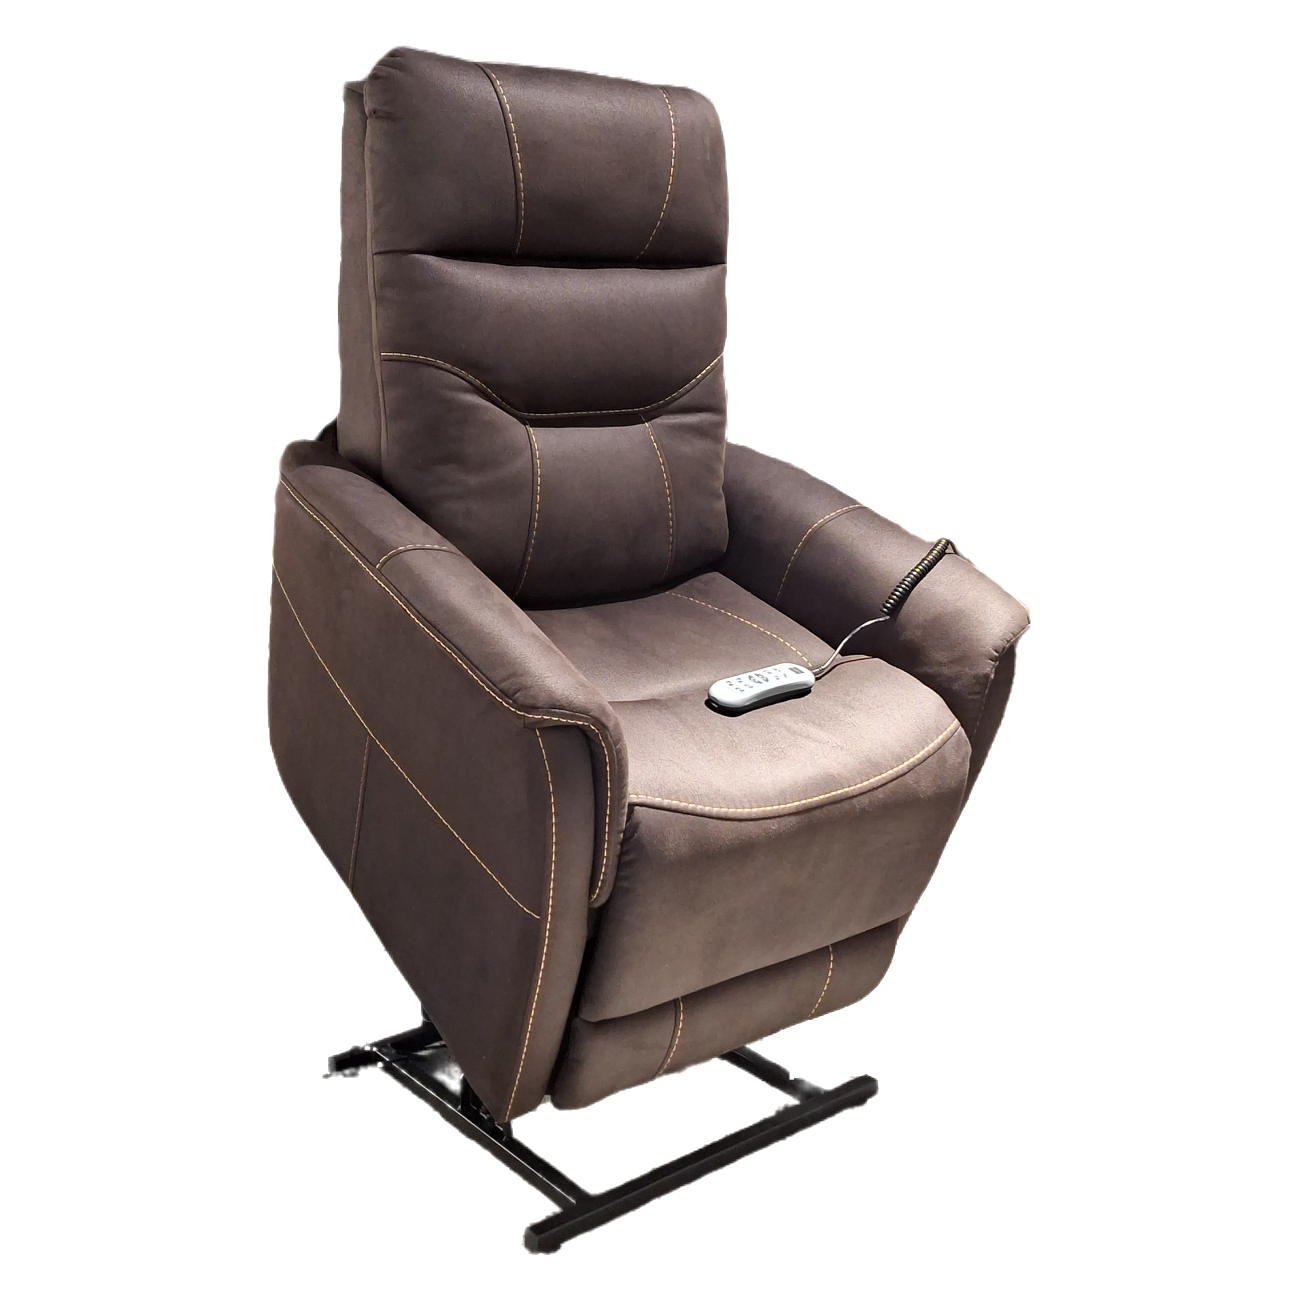 buy-widest-range-of-electric-lift-chairs-recliners-different-colours-sizes-and-finishes-mobility-joy-central-coast